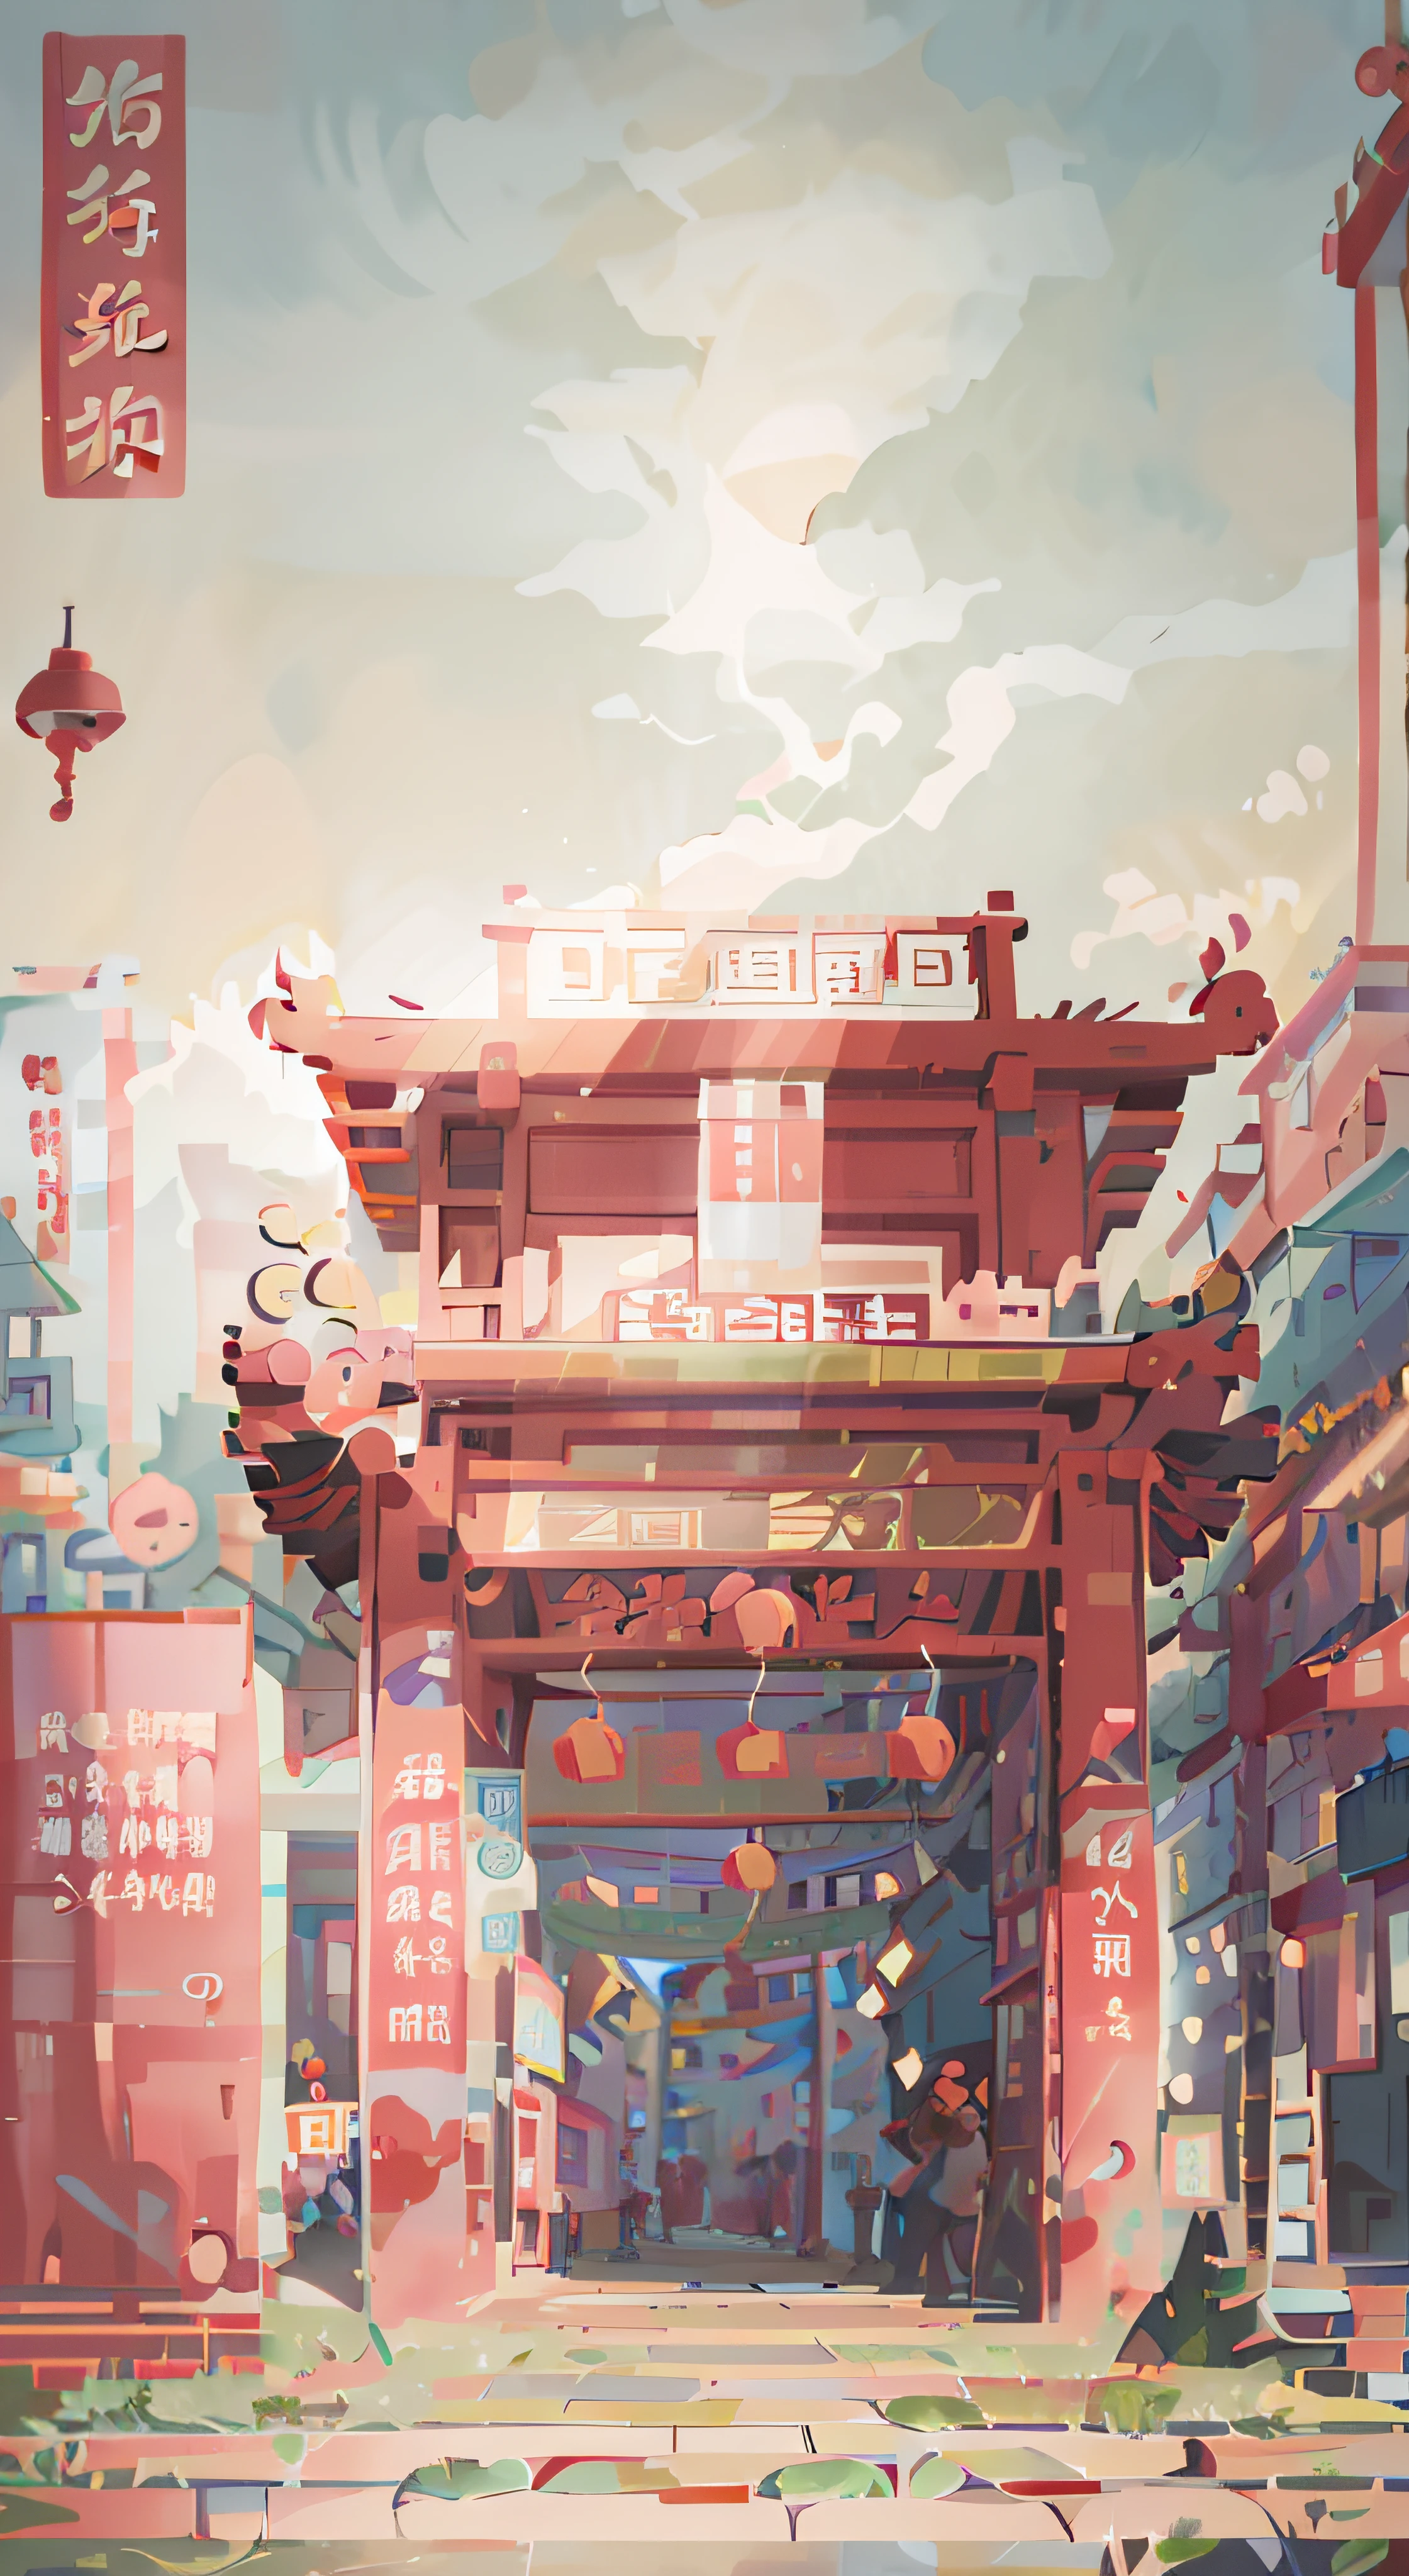 There is a red building in the middle of the street，There are lanterns hanging from it, dreamy Chinese towns, author：Shitao, Anime background art, G Liulian art style, A beautiful artwork illustration, low details. Digital painting, anime backgrounds, ross tran. scenery background, anime style cityscape, Rosla global lighting, trending on cgstation